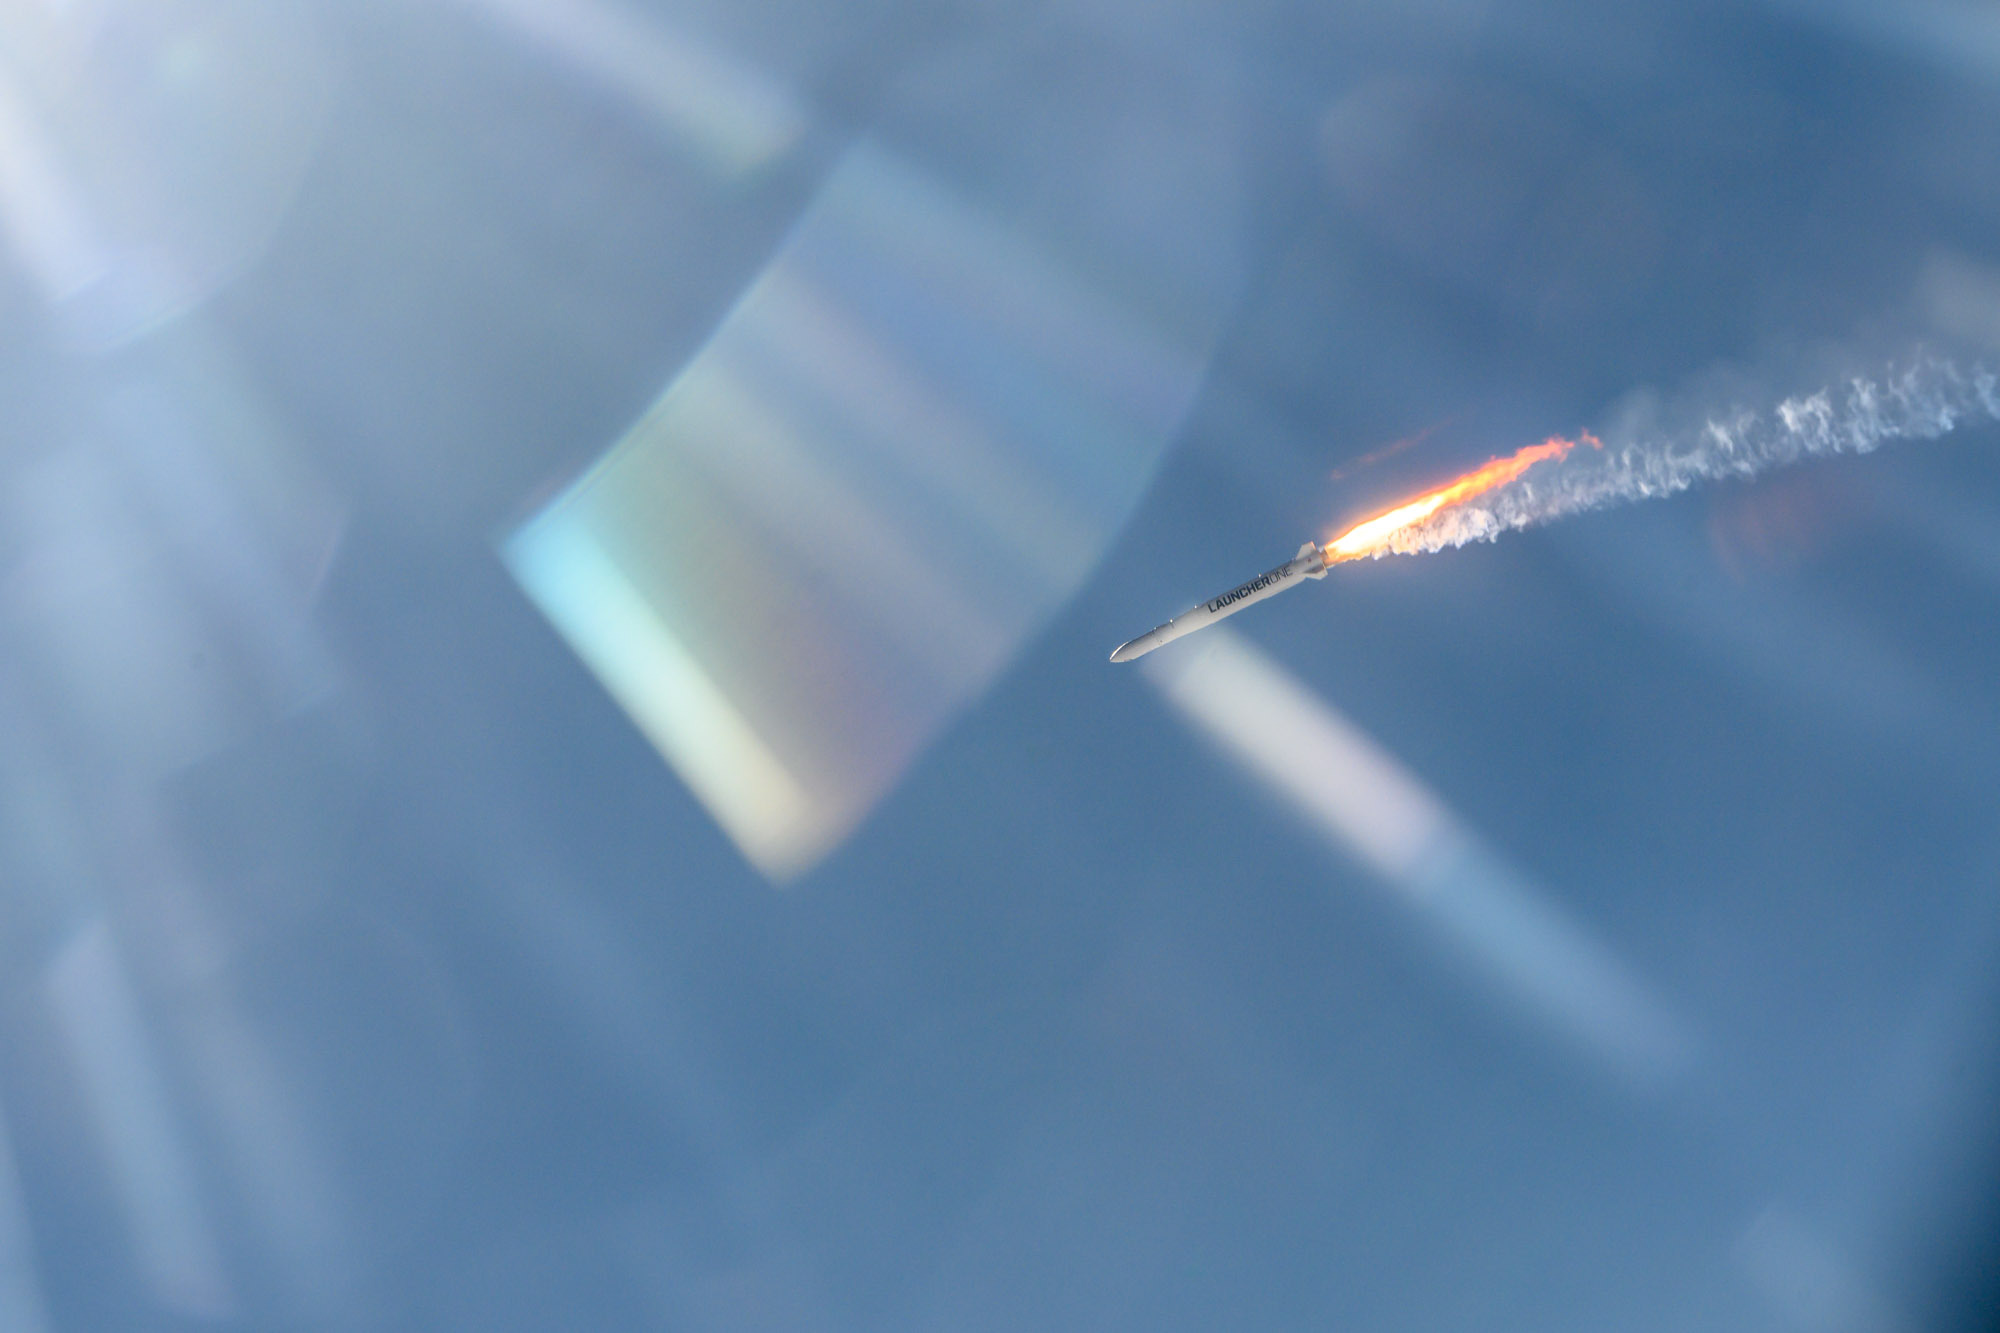 Rocket in the sky, with sunlight rays blurring view.